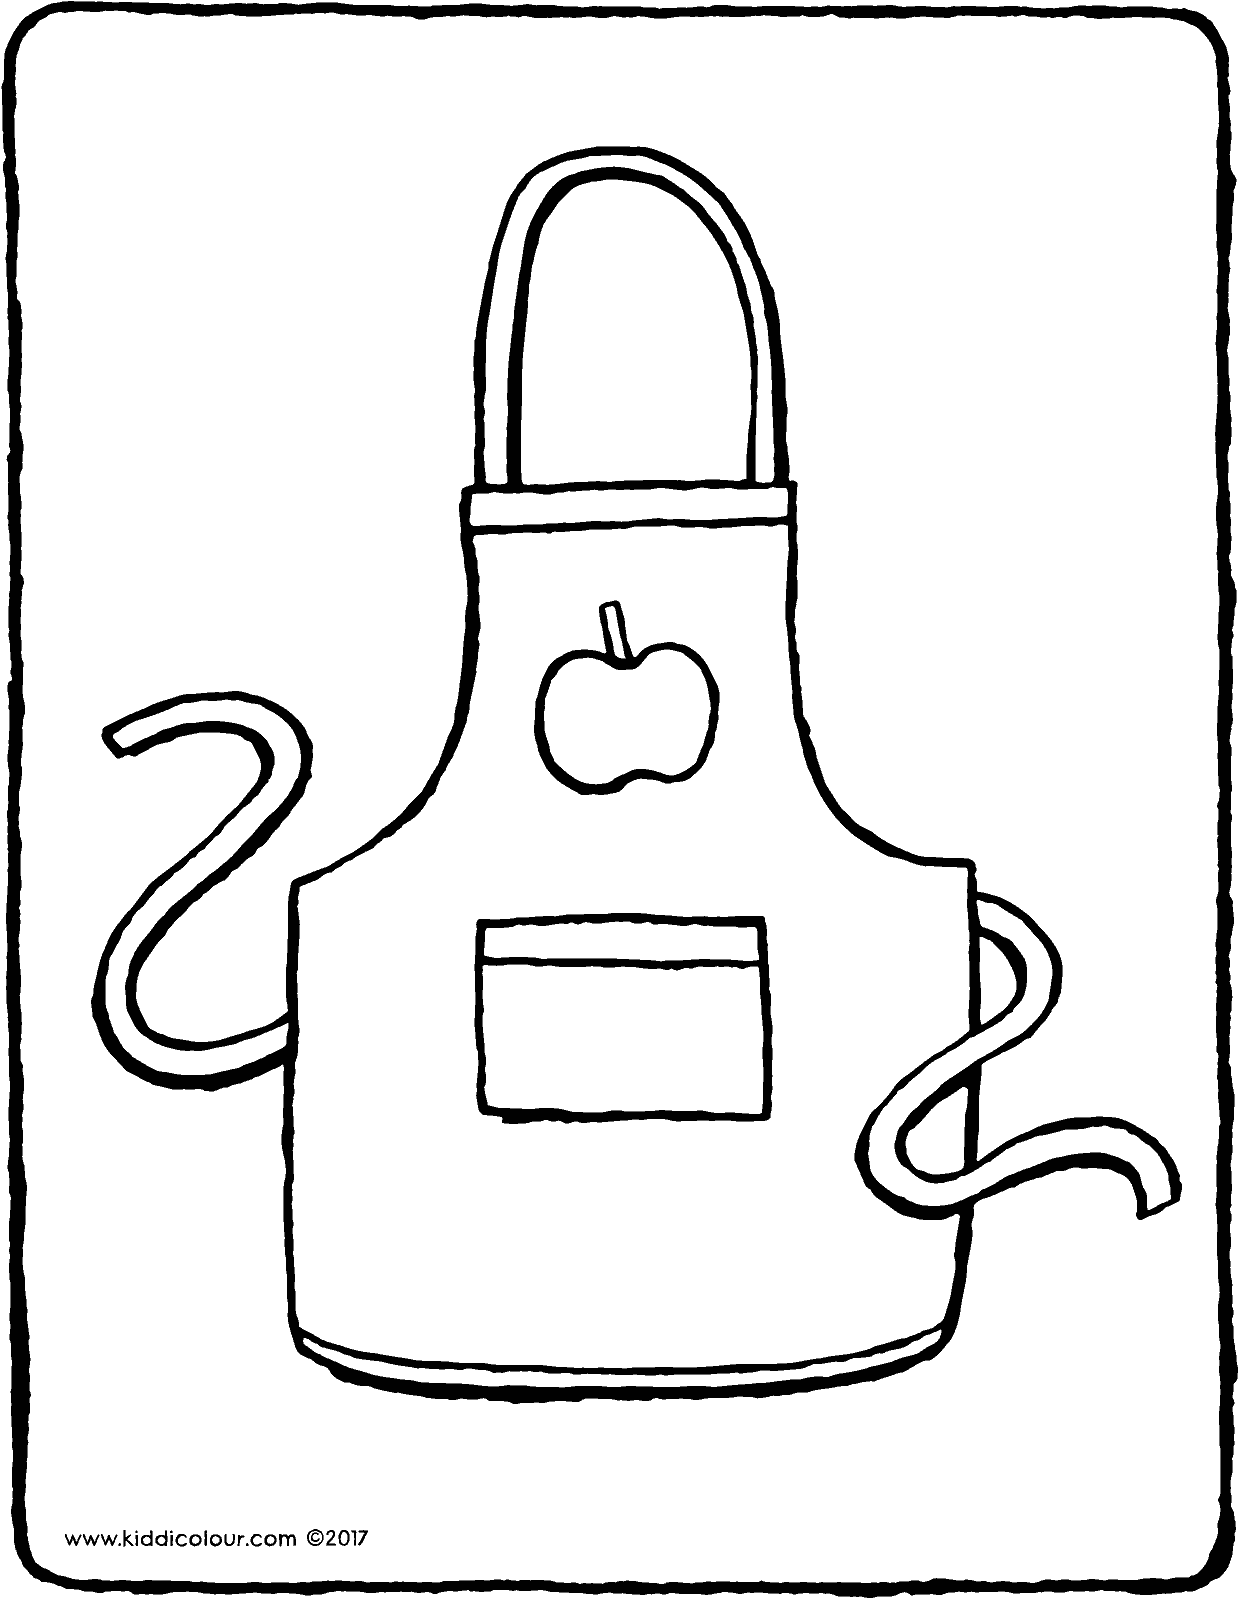 apron-coloring-page-at-getdrawings-free-download